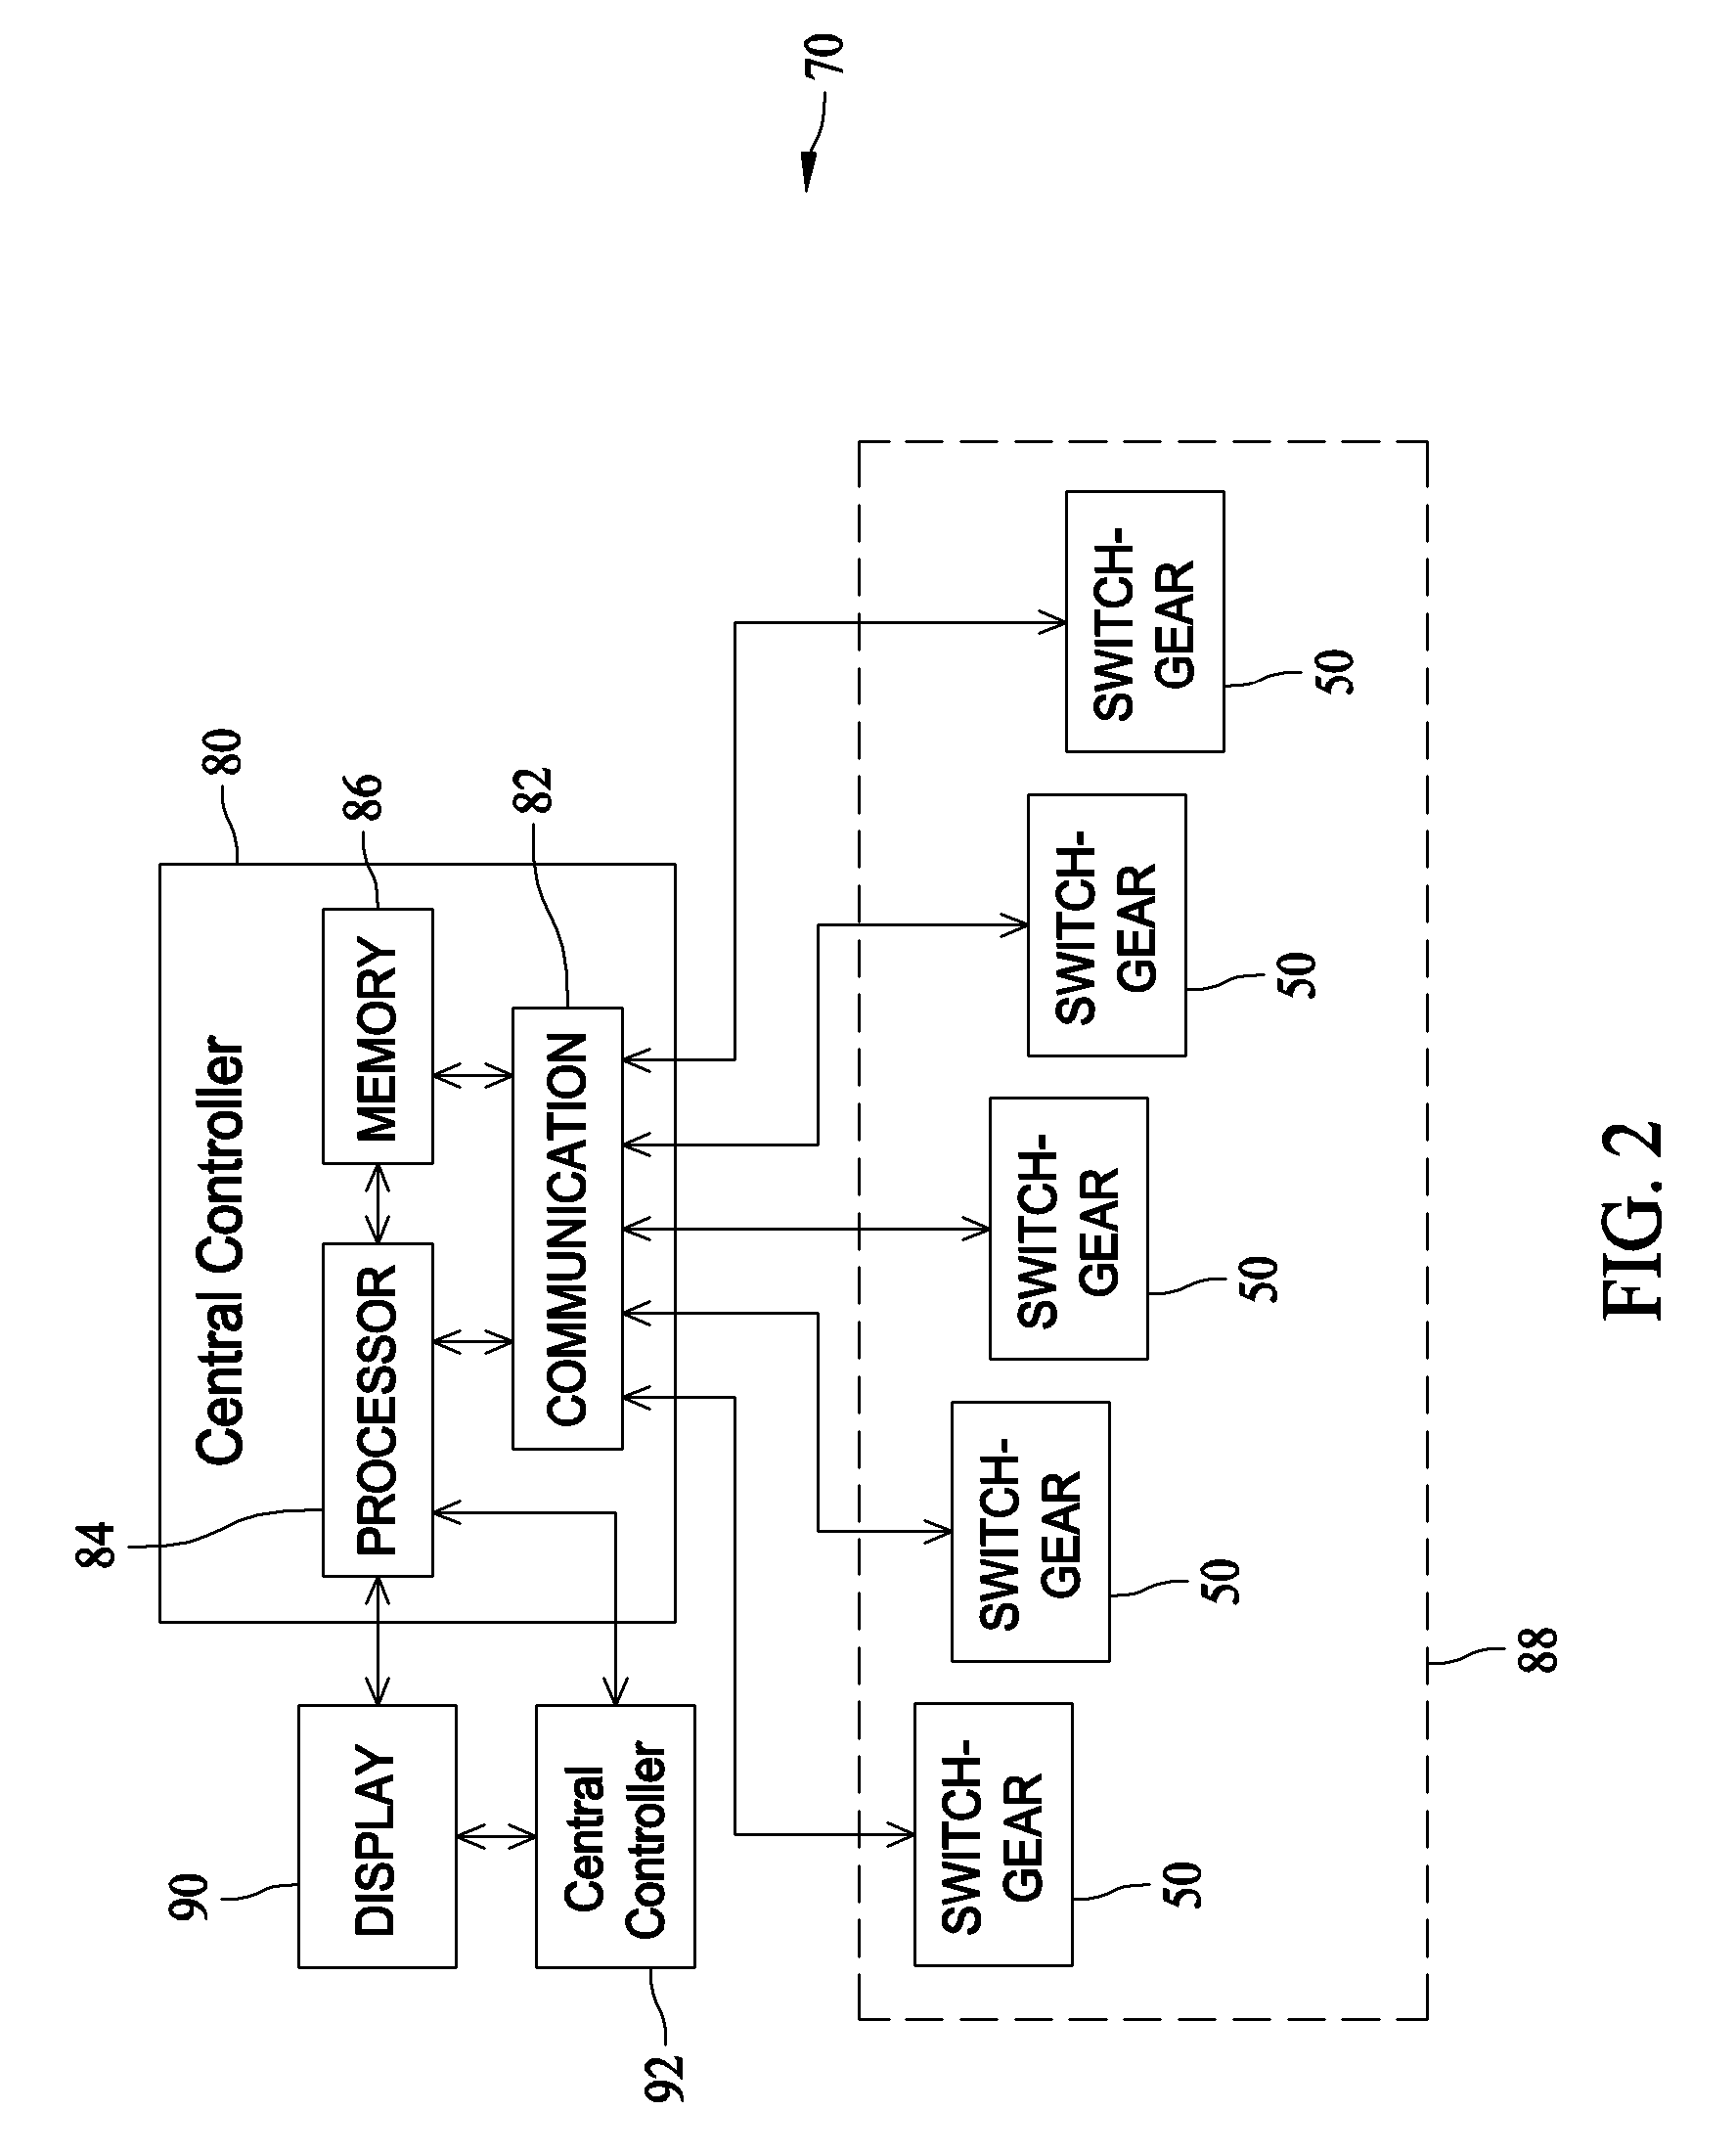 Method and system for controlling a power distribution system